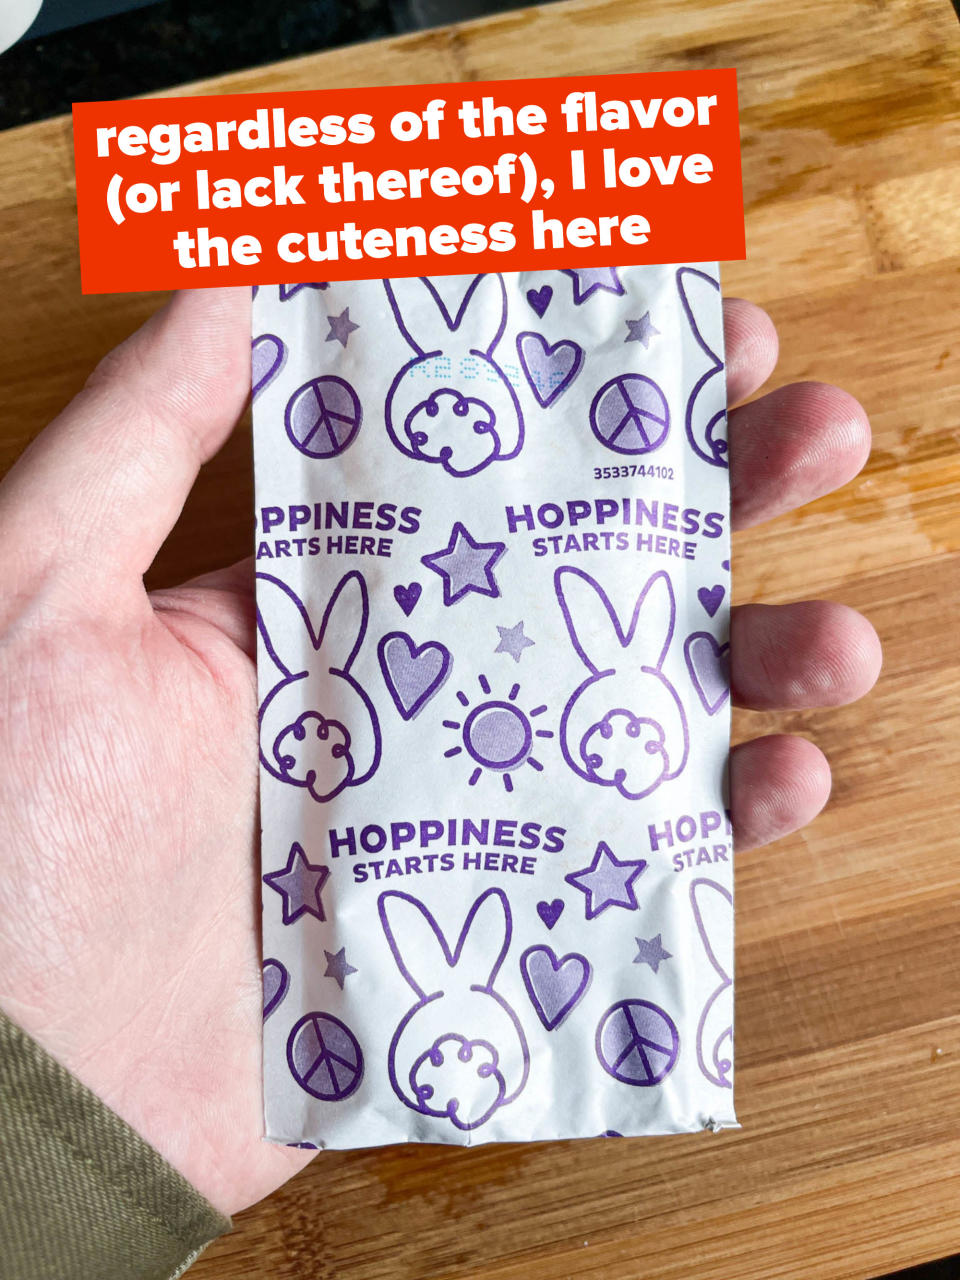 Cute-looking cheese packet in the author's hand with bunnies on it and "hoppiness starts here", with text "regardless of the flavor, I loved the cuteness here"